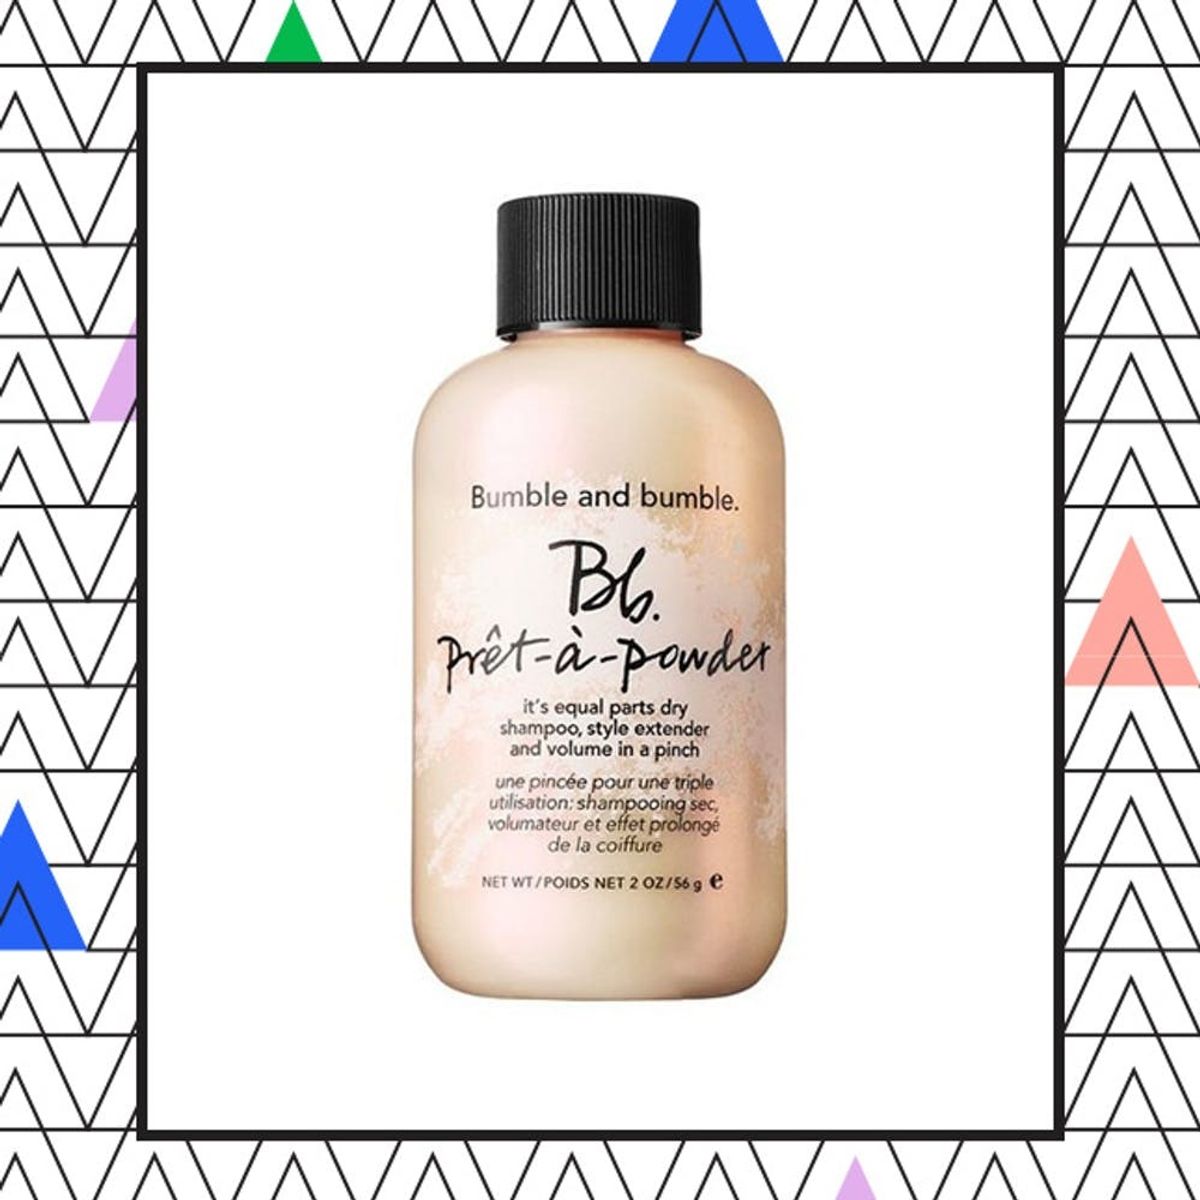 This Product Might Make You Replace Your Dry Shampoo